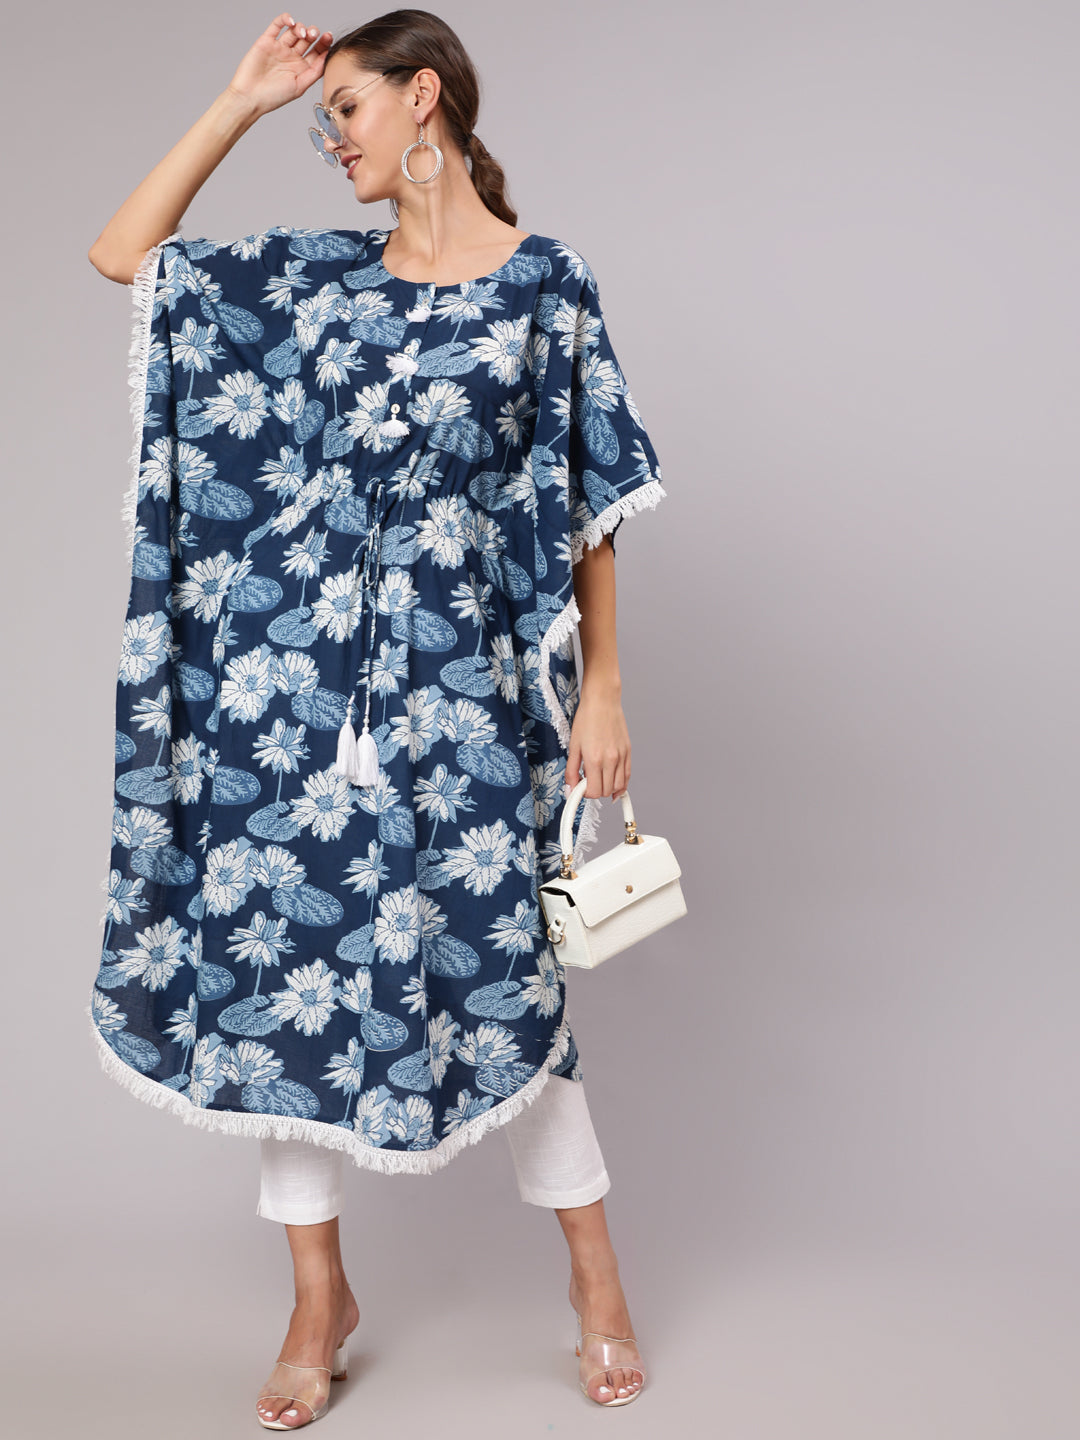 A Blue Color Cotton Pigment Floral Printed Kaftan With With Laced Embellishments Paired With Solid White Pants